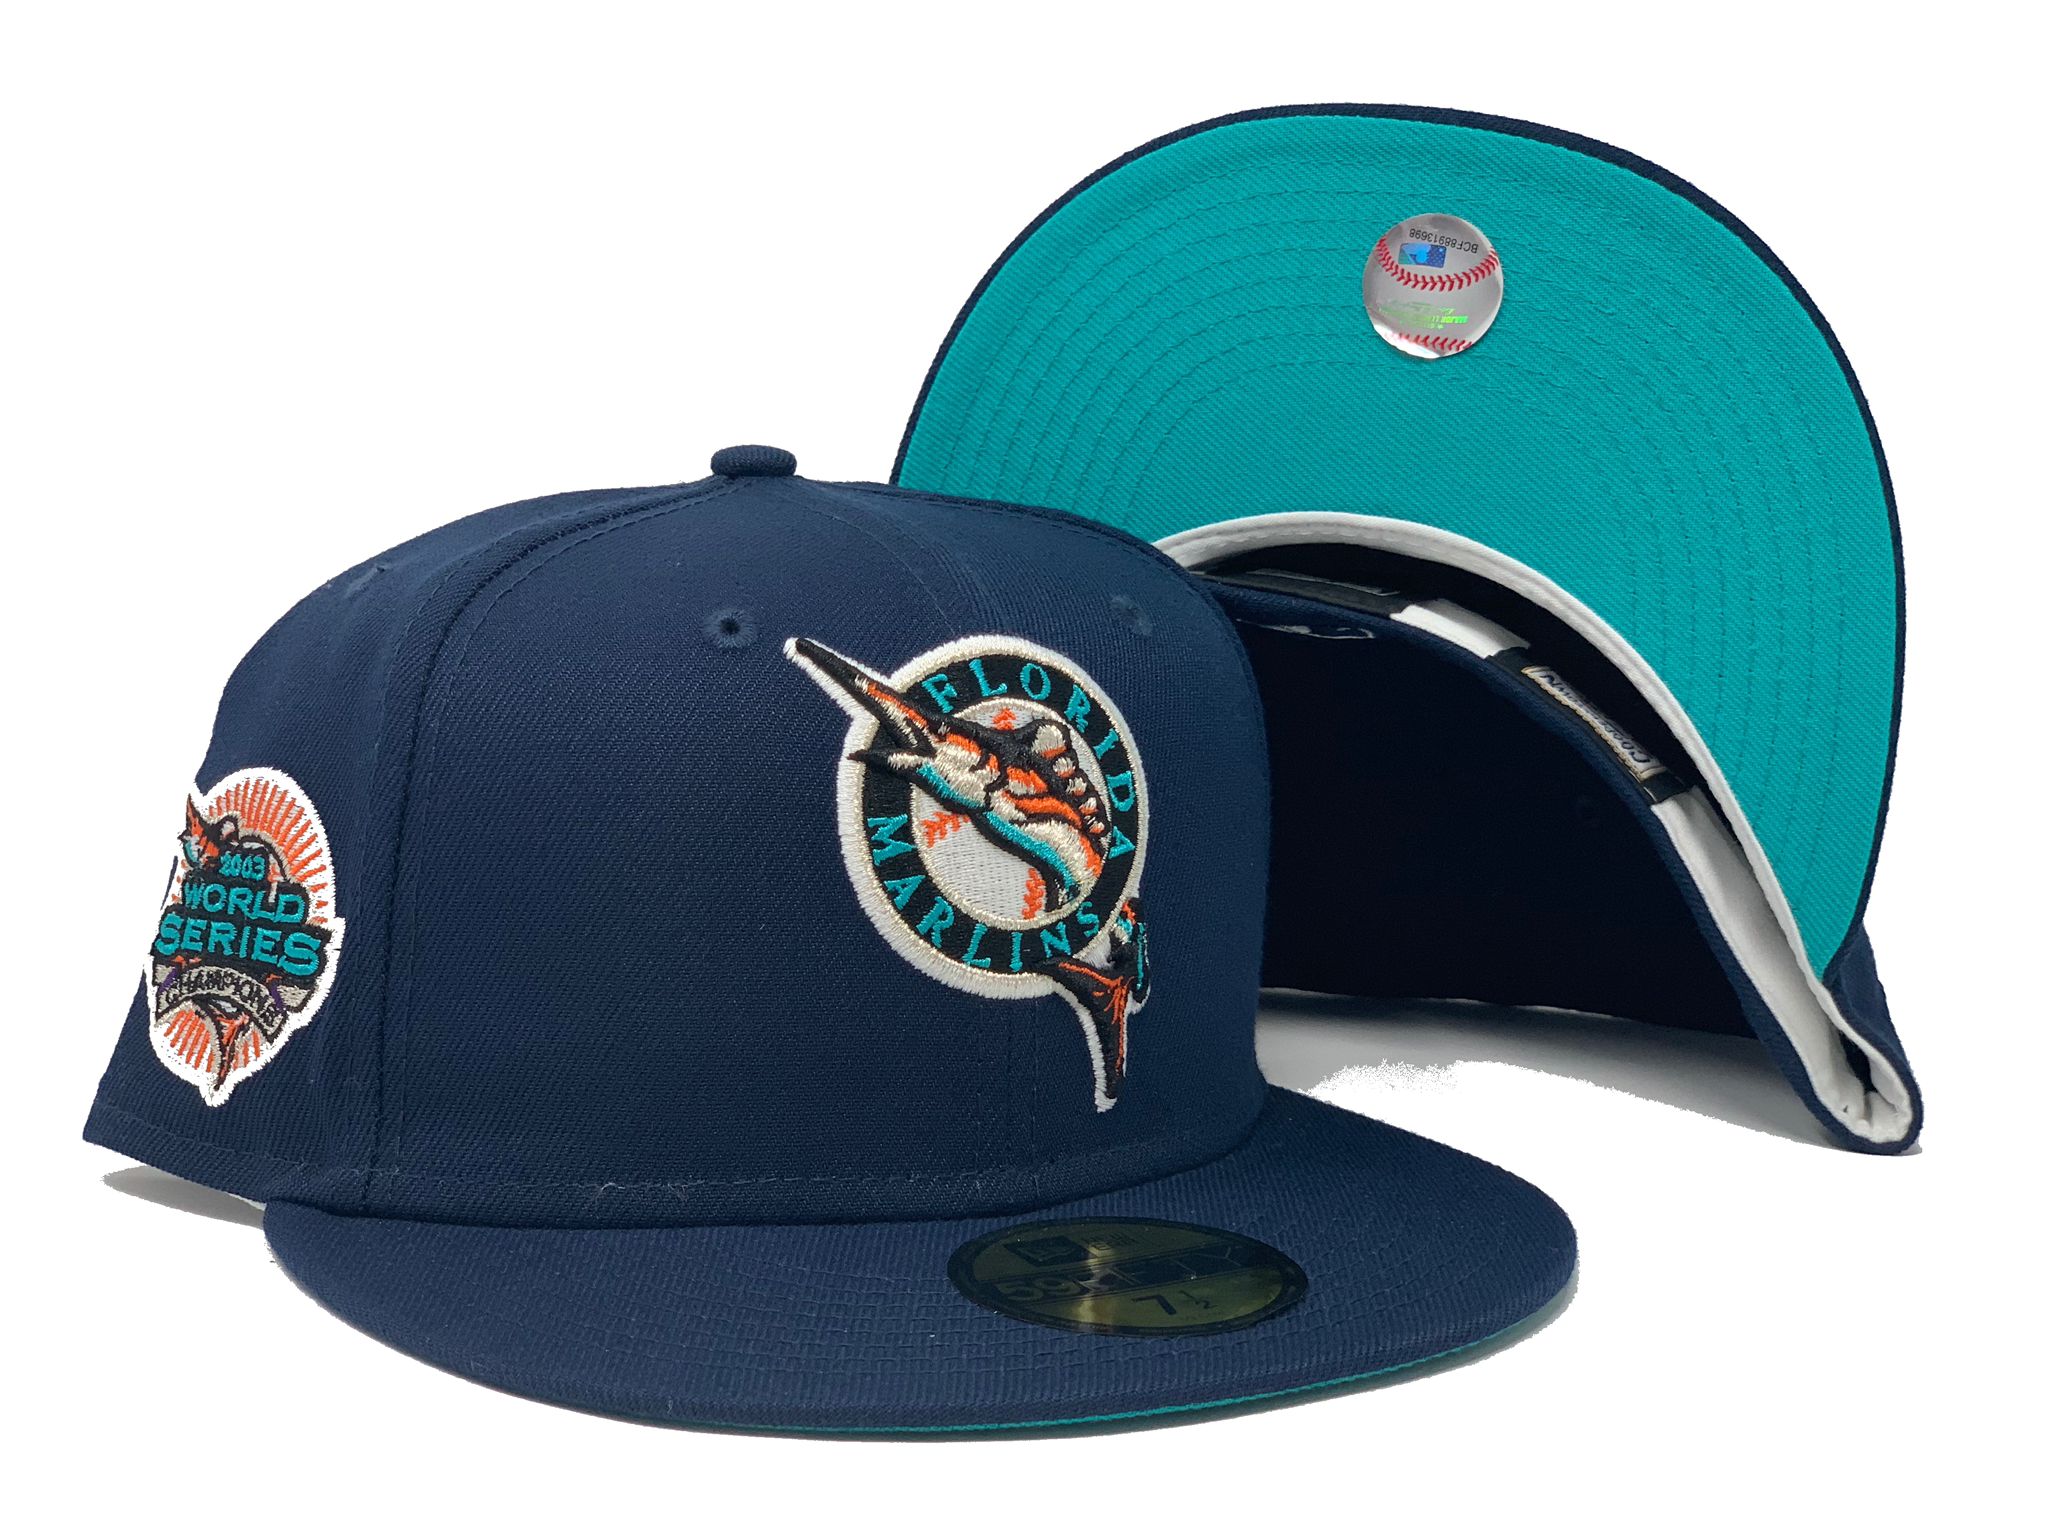 New Era Florida Marlins World Series 2003 Pinstripe Heroes Elite Edition 59FIFTY Fitted Hat